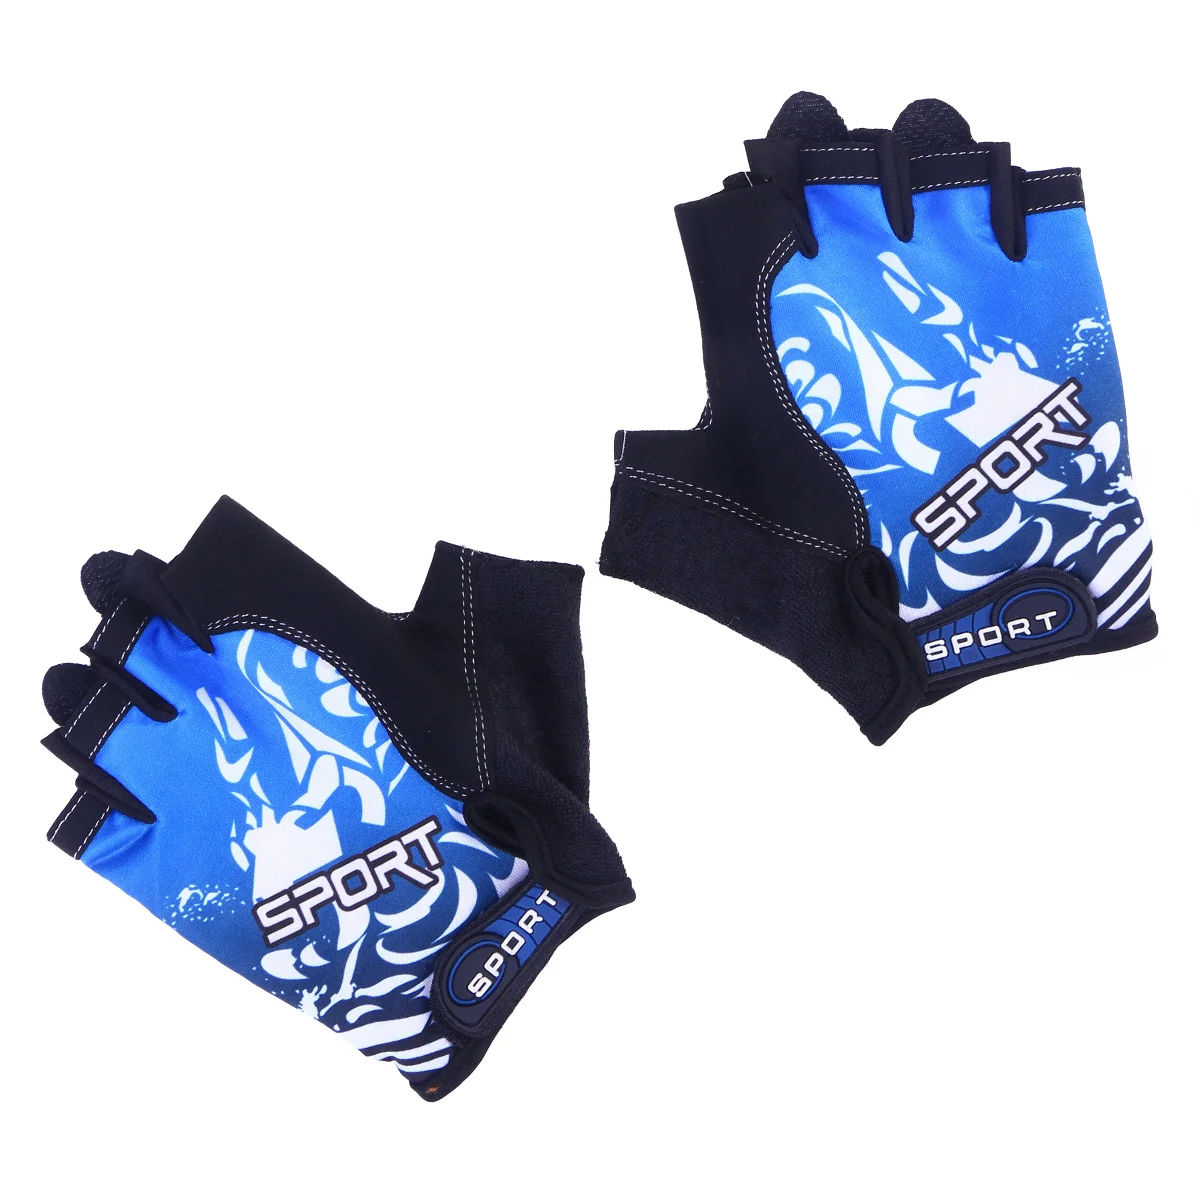 1 Pair Outdoor Sports Half Finger Gloves Non-Slip Breathable Workout Gloves for Cycling Climbing Fishing Riding Size M (Blue) walk fish fishing gloves non slip breathable ultrathin unisex half finger glove camping fishing carp equipment guantes de pesca